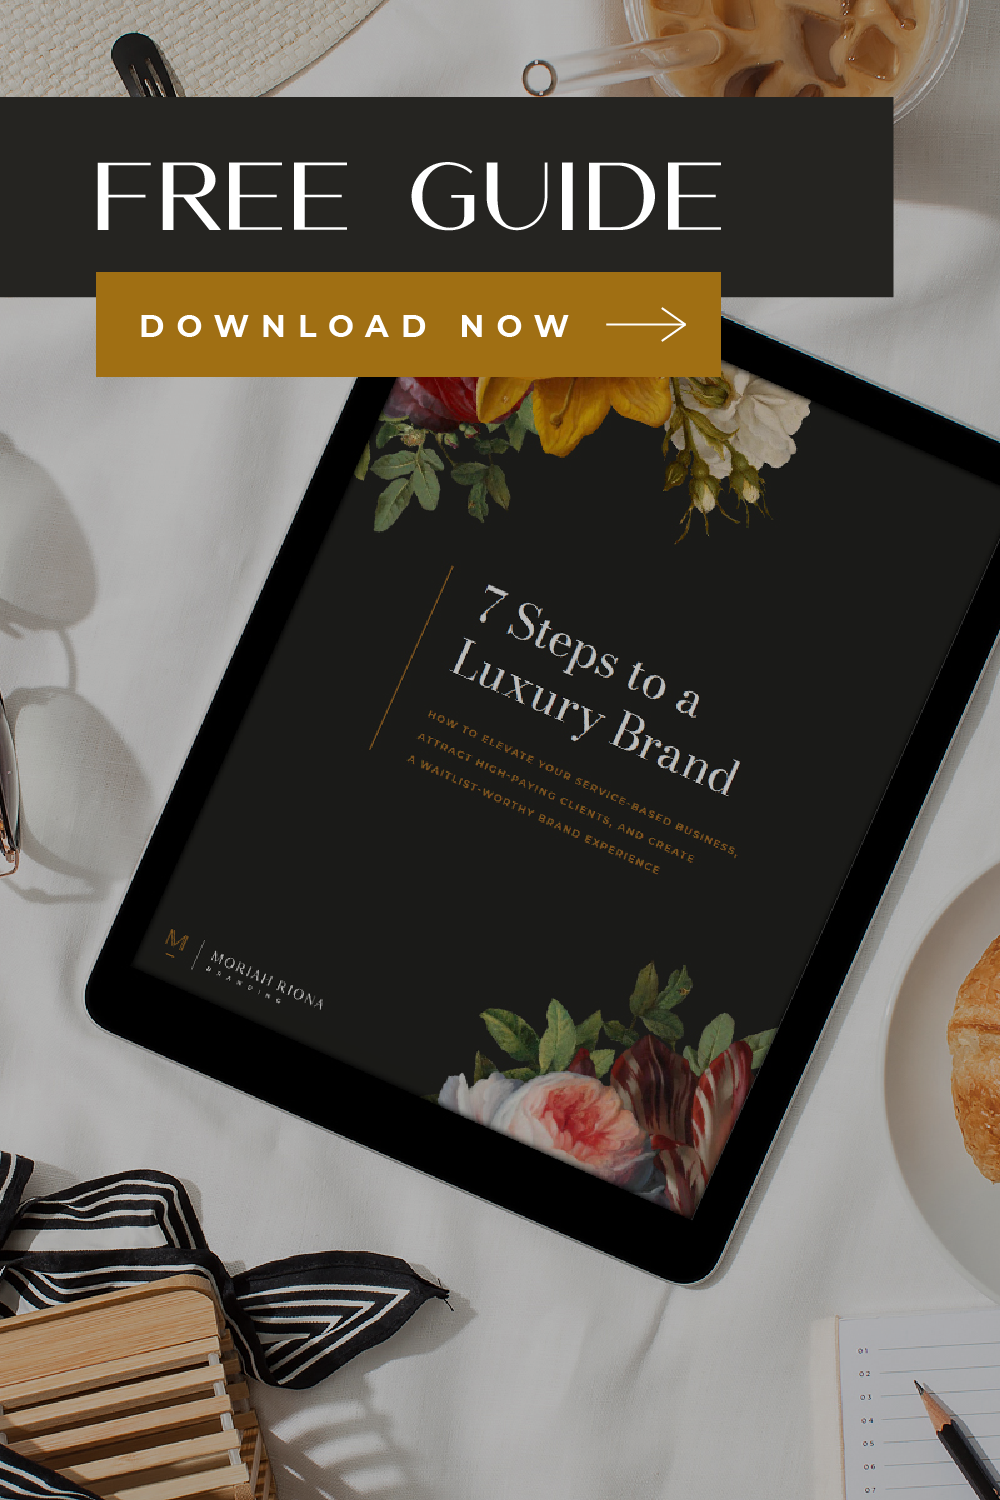 Ready to build your own LUXURY brand? This FREE guide is for you! Download now to learn top luxury branding tips from luxury brand designer and brand strategist Moriah Riona Branding! #luxury #branding #marketing #entrepreneur